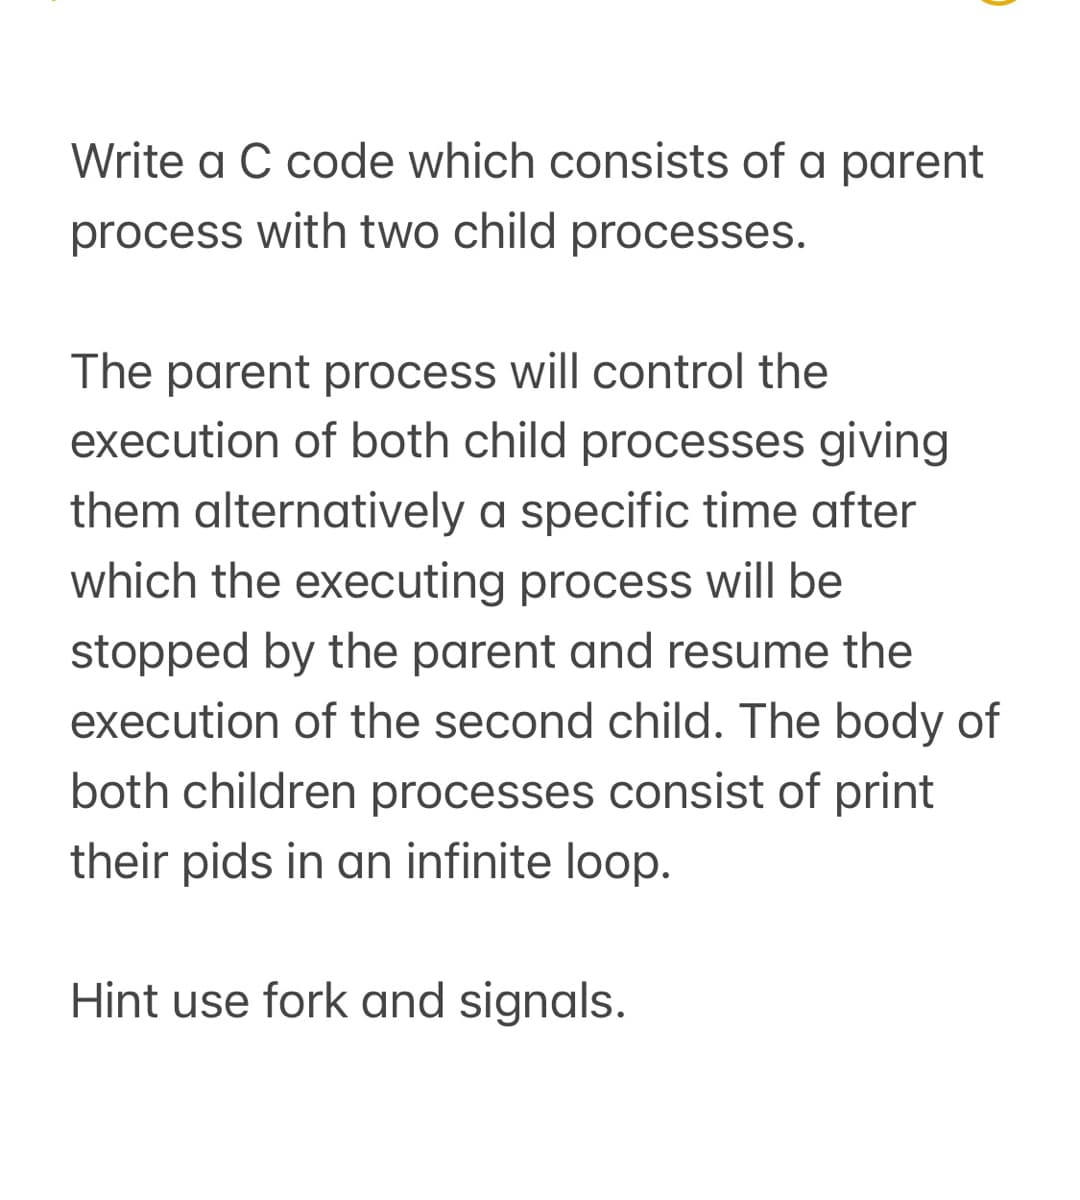 Write a C code which consists of a parent
process with two child processes.
The parent process will control the
execution of both child processes giving
them alternatively a specific time after
which the executing process will be
stopped by the parent and resume the
execution of the second child. The body of
both children processes consist of print
their pids in an infinite loop.
Hint use fork and signals.
